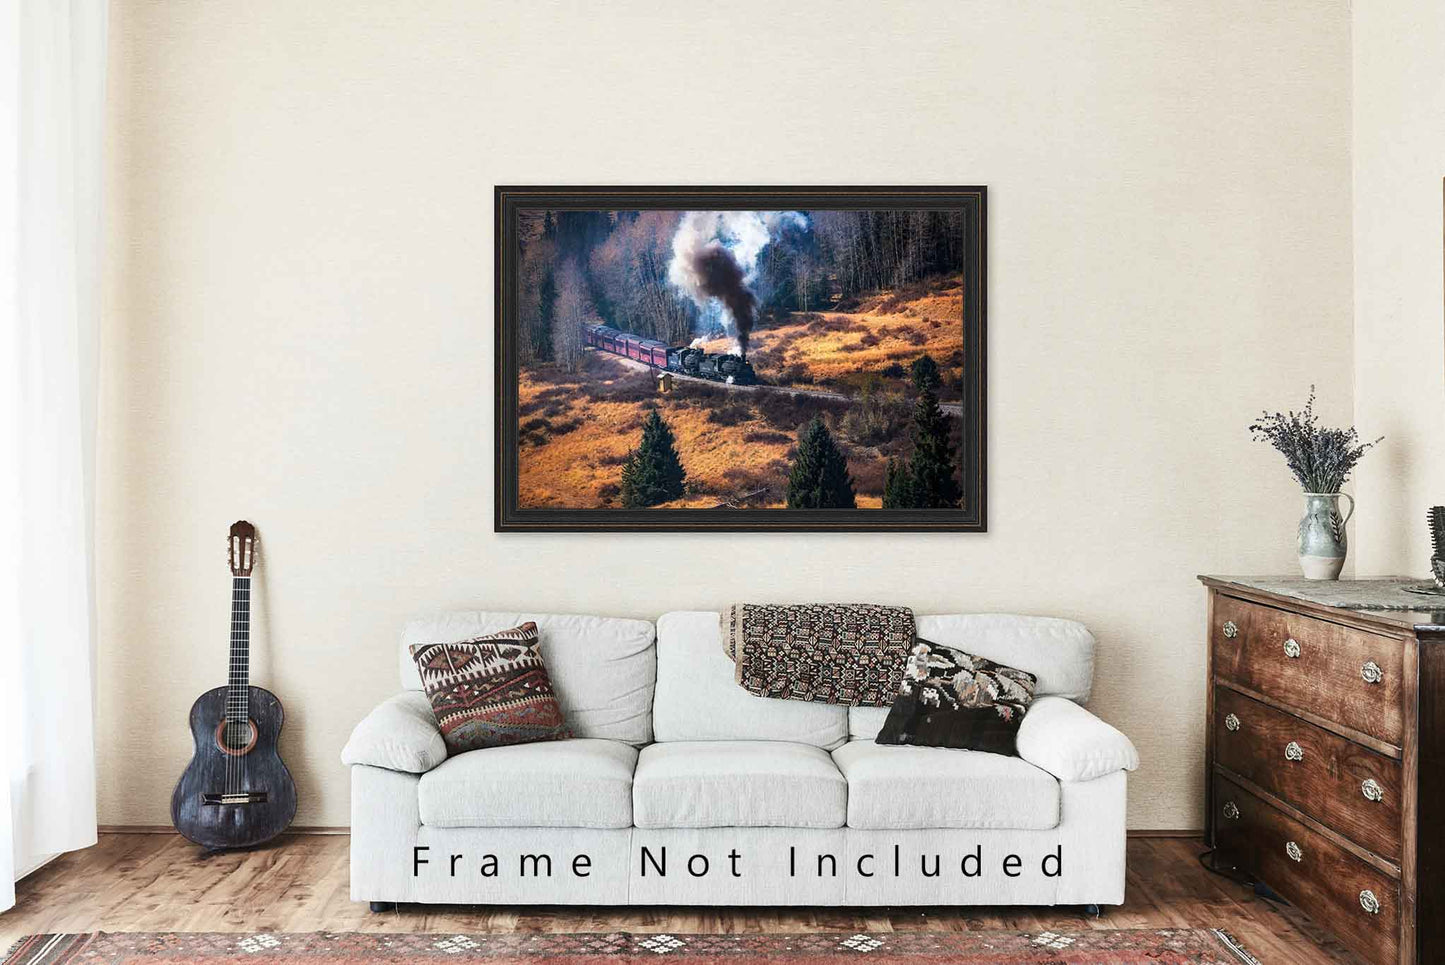 Train Photography Print - Picture of Steam Locomotive on Autumn Day in Colorado Mountains Railroad Home Decor Wall Art Photo Artwork